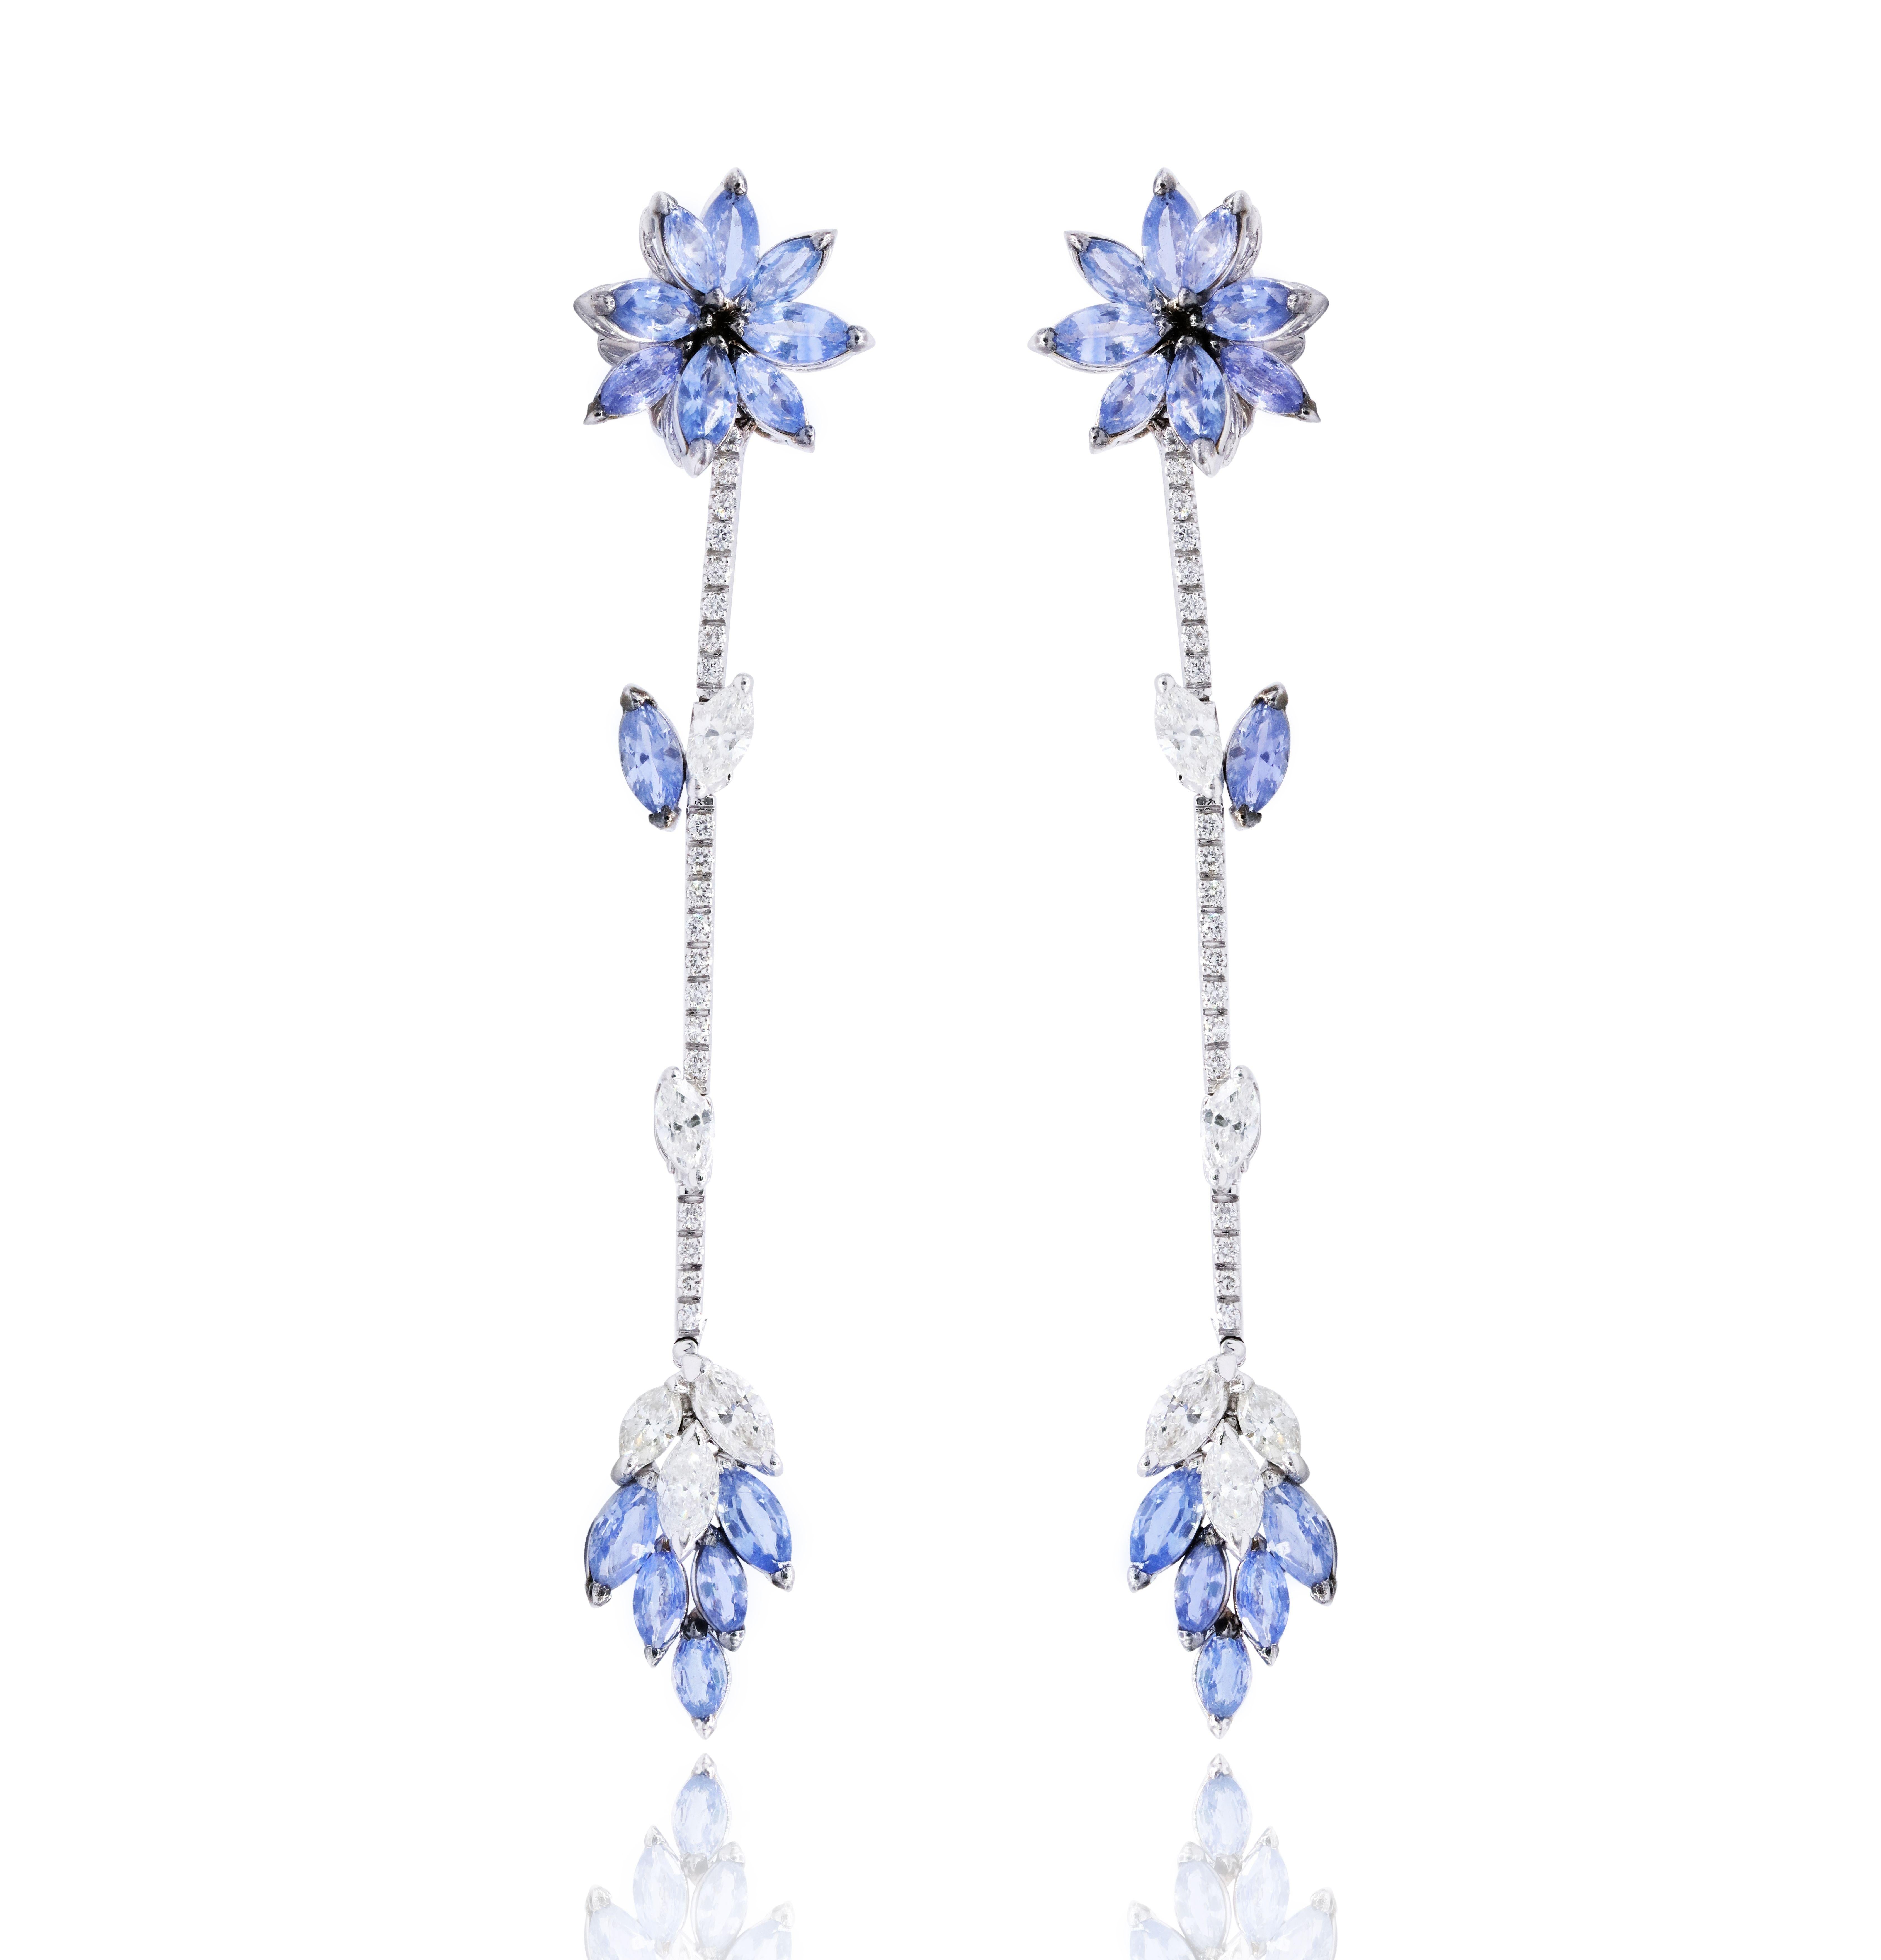 Diana M. 6.23 Carat Sapphire and Diamond Hanging Flower Earrings In New Condition For Sale In New York, NY